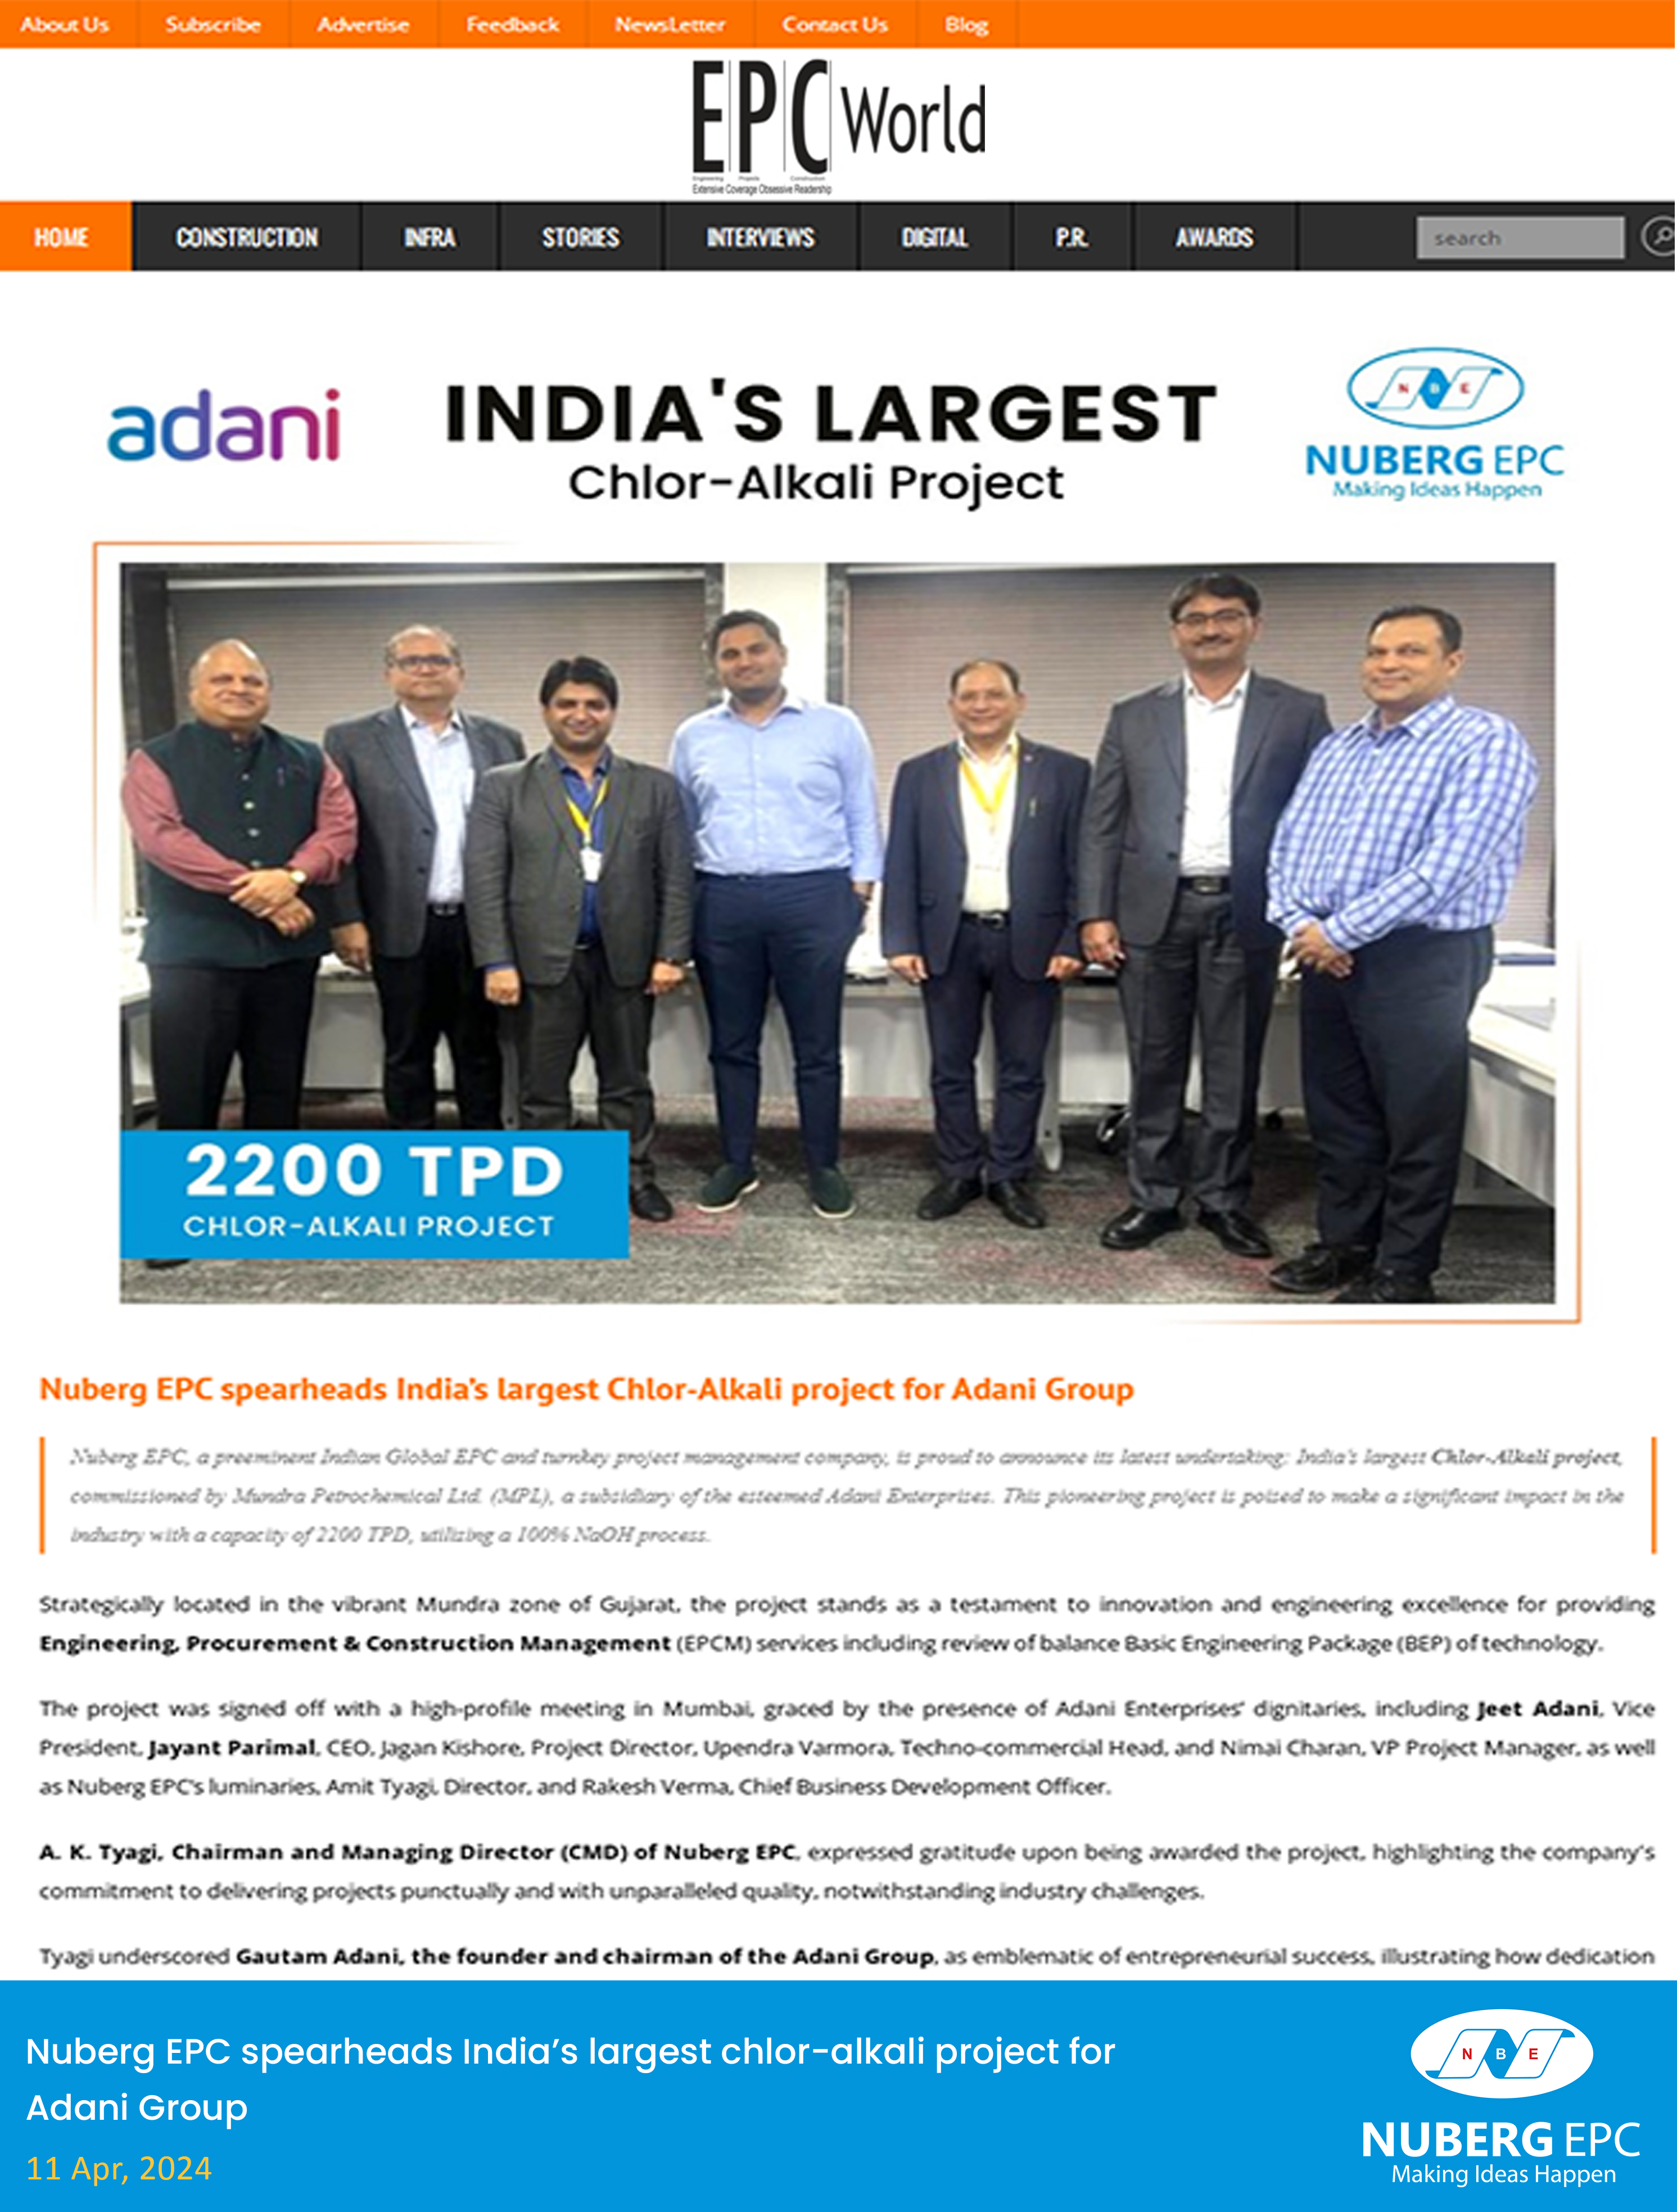 Nuberg EPC Spearheads India’s Largest Chlor-Alkali Project for Adani Group